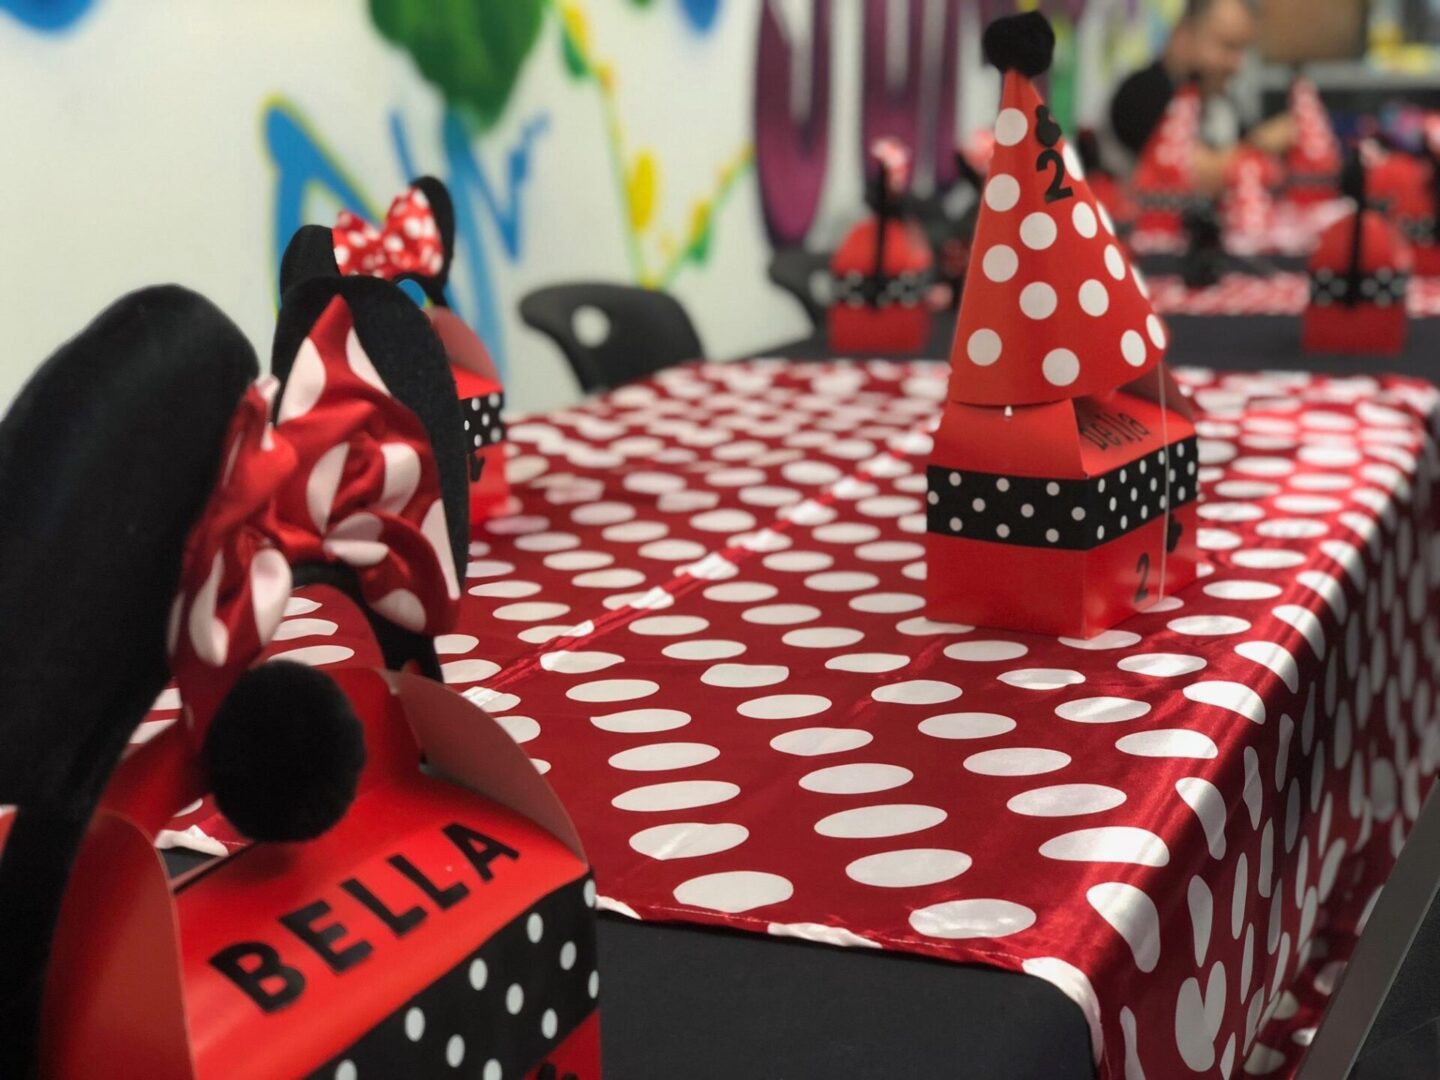 A table with red and white polka dot tablecloth.